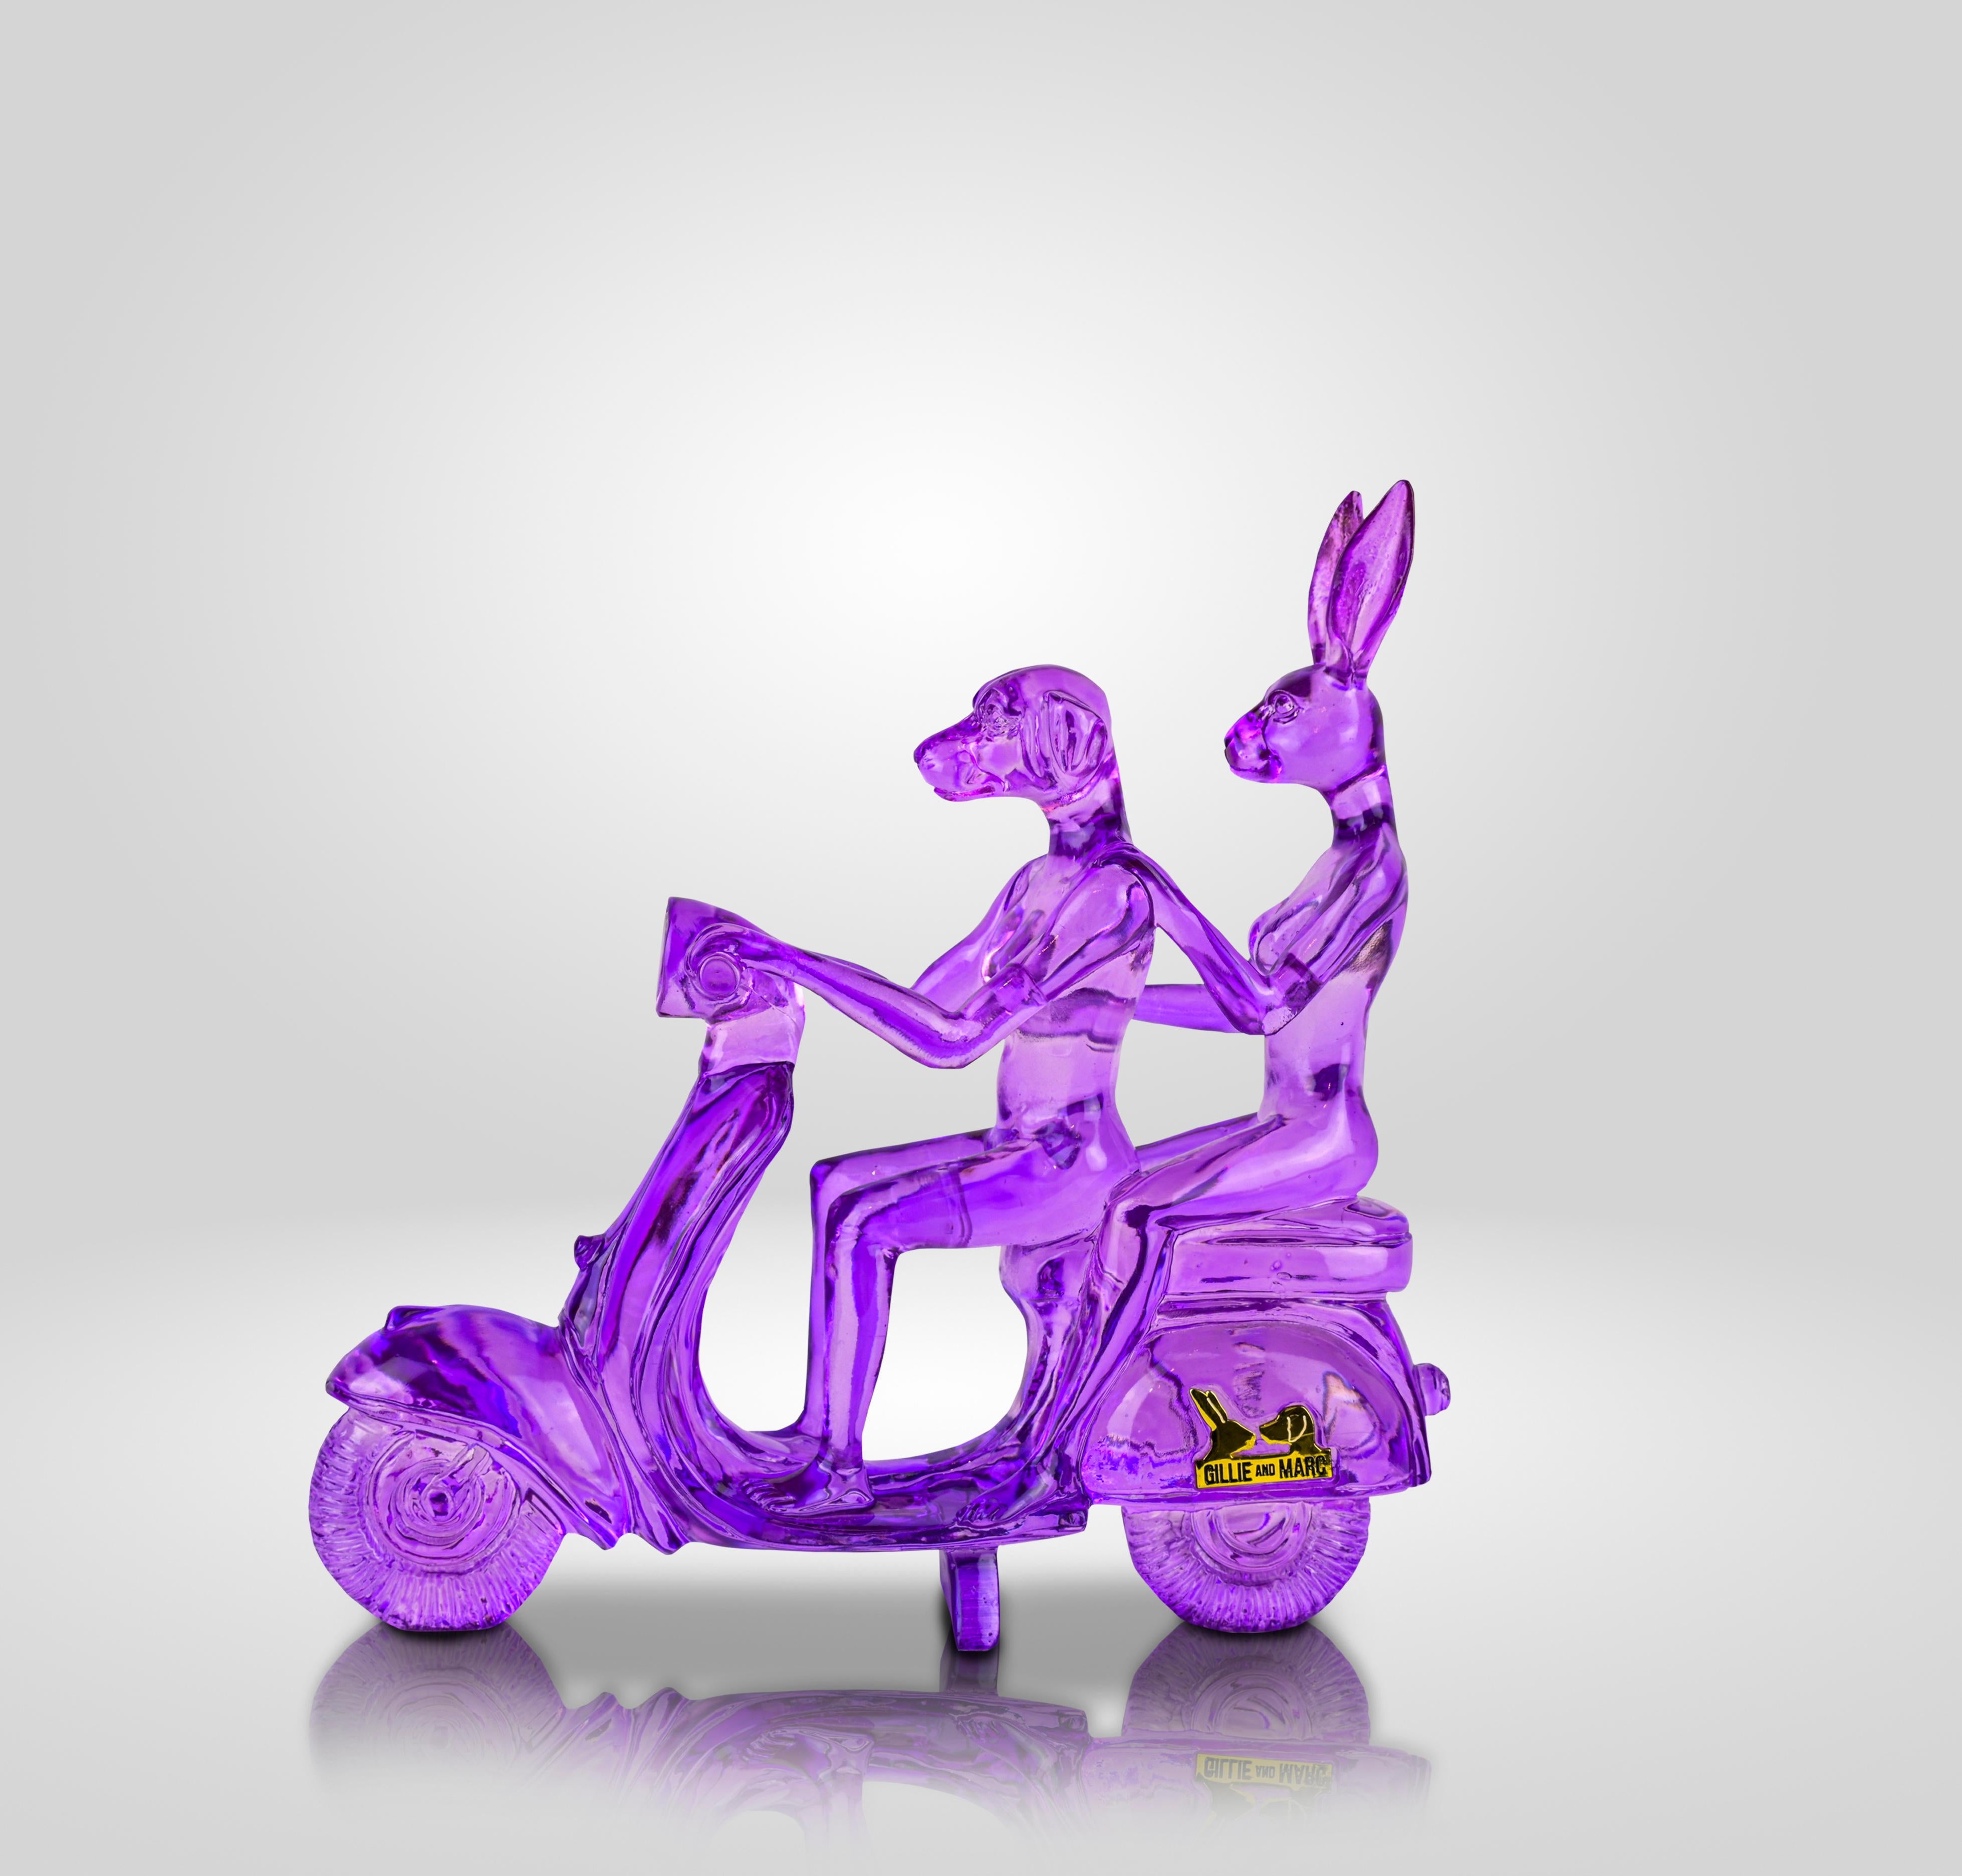 Title: Lolly mini vespa riders (Clear Resin Sculpture) in Purple
Authentic resin sculpture
Open Edition

Description
This stunning miniature sculpture is modelled off one of Gillie and Marc’s most iconic pieces of work, featuring Dogman and